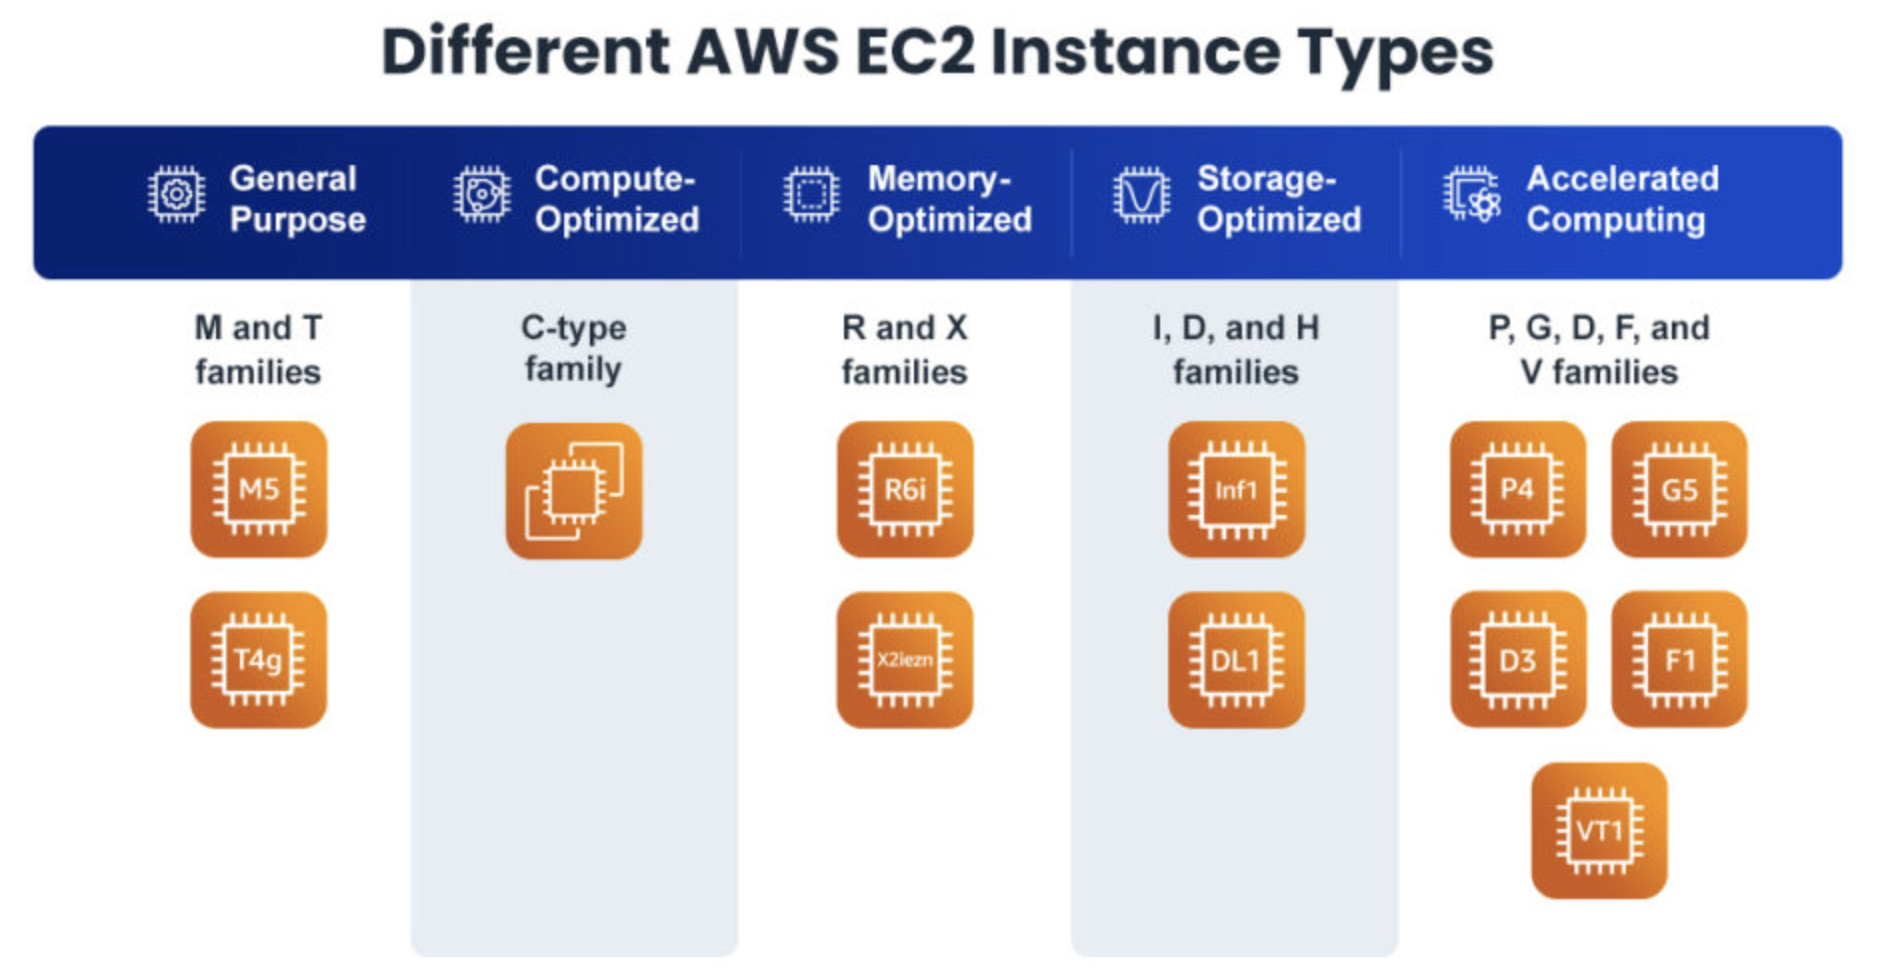 5 Actionable Tips to Reduce Your AWS EC2 Costs Today!